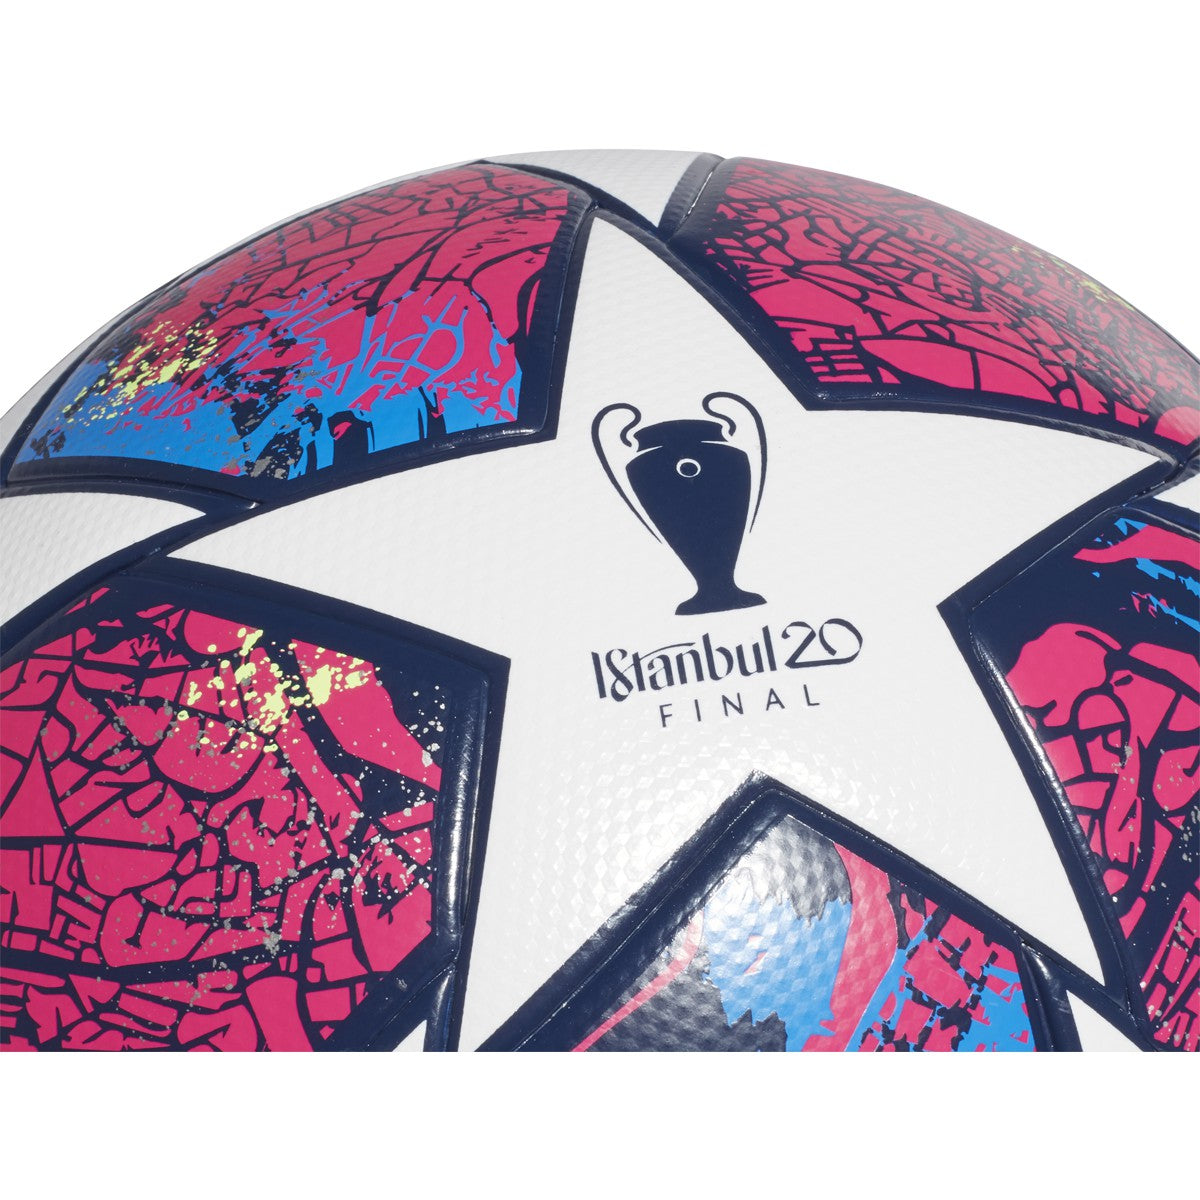 ucl finale madrid top training ball